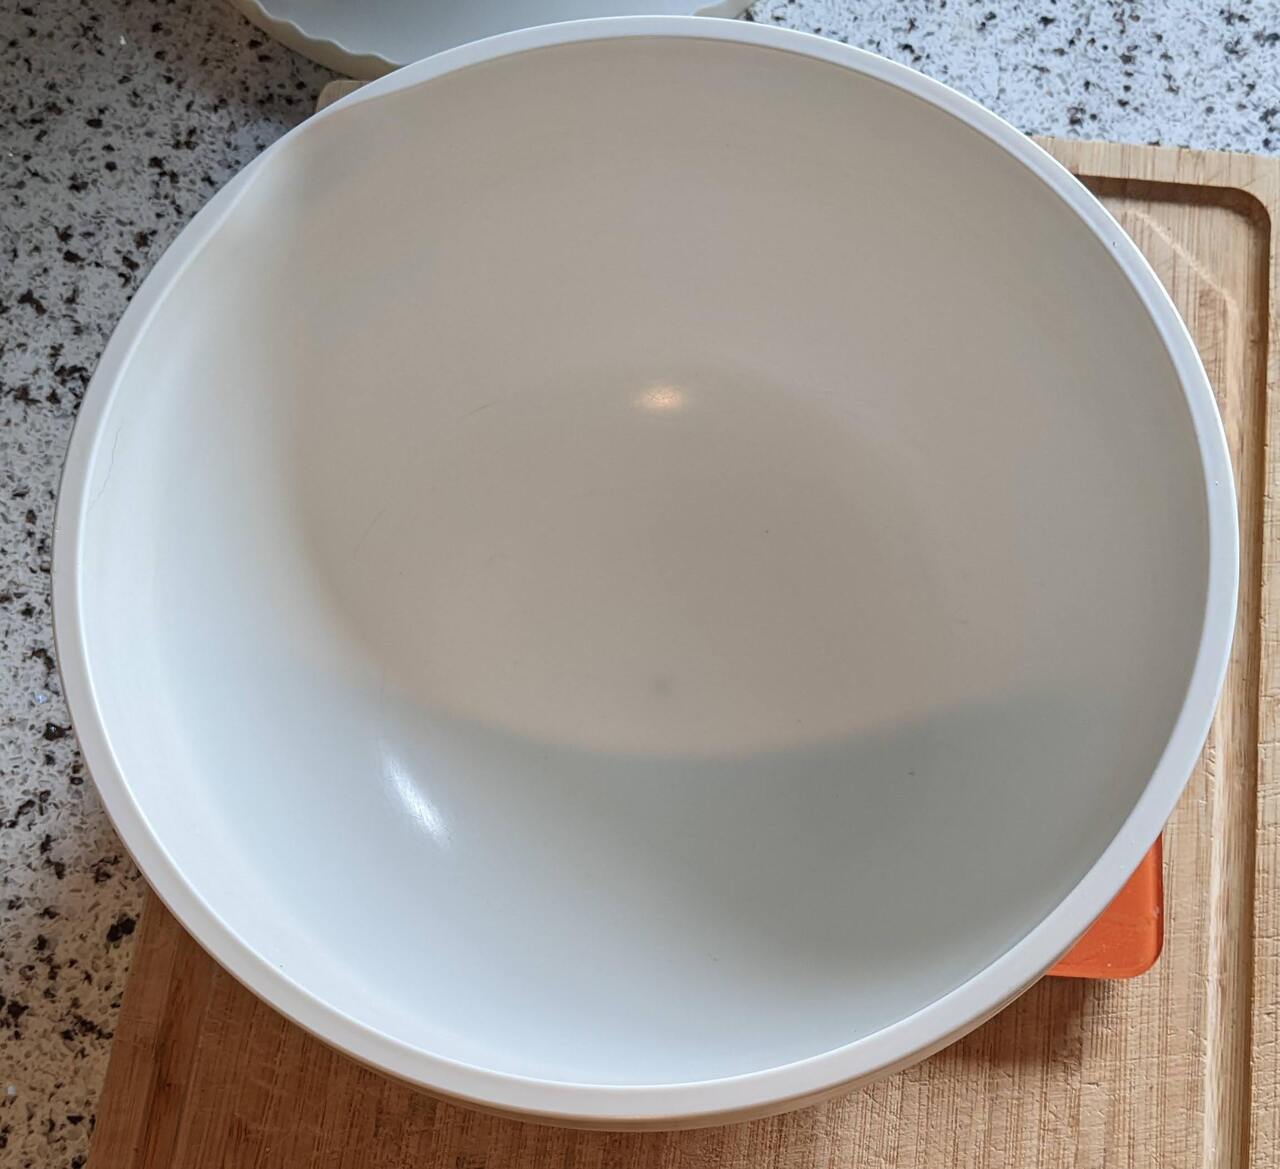 Start with a large empty bowl